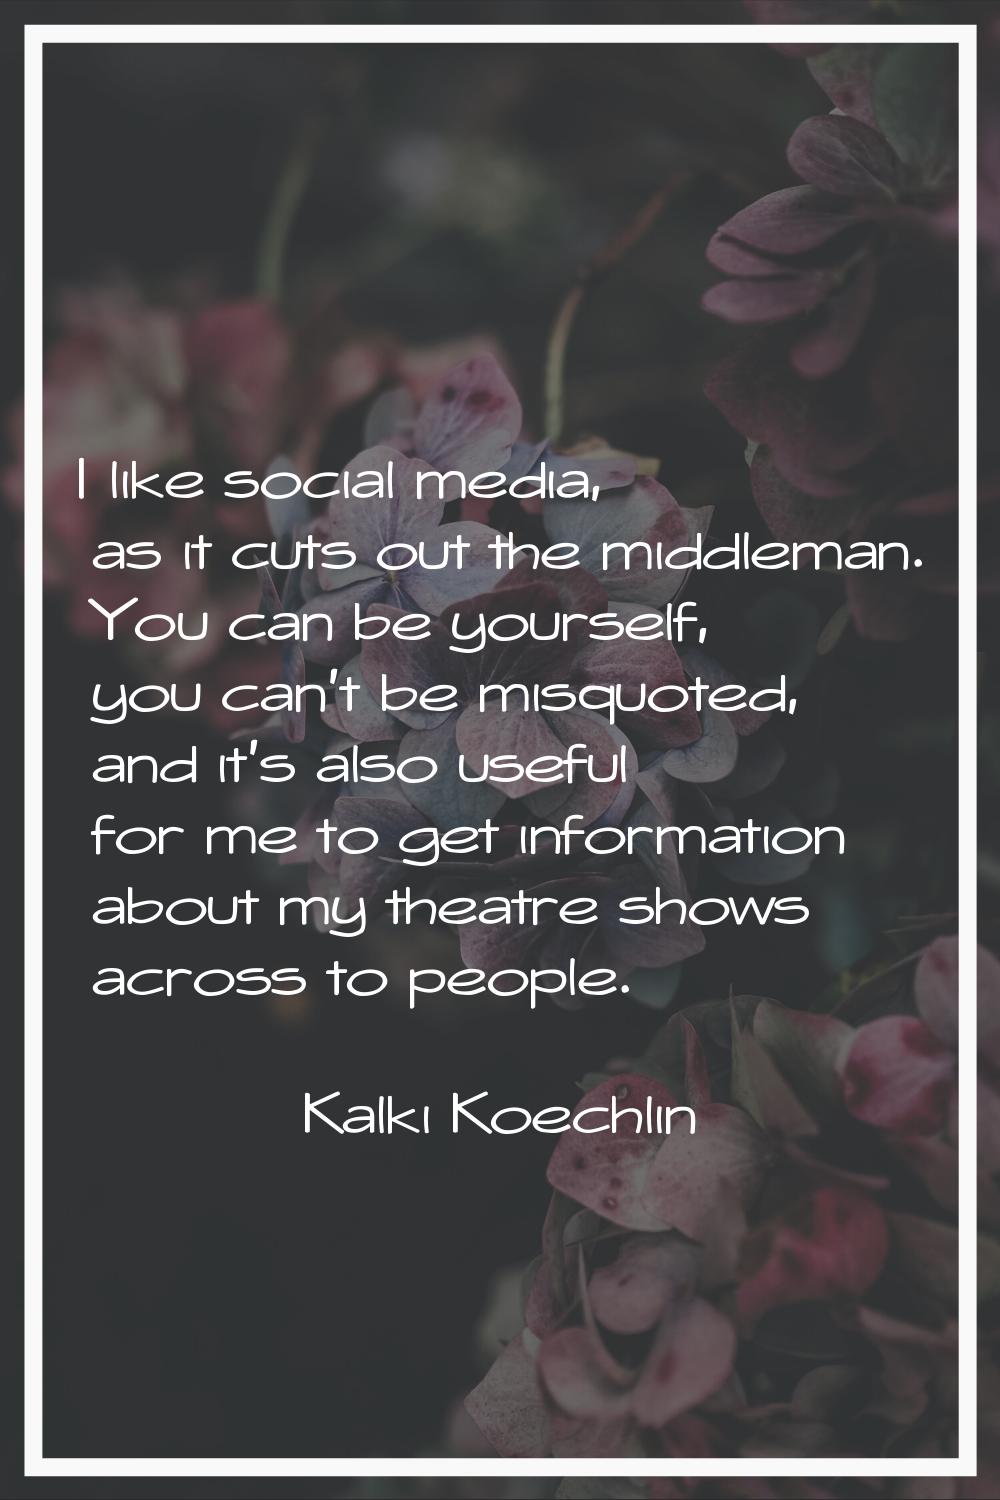 I like social media, as it cuts out the middleman. You can be yourself, you can't be misquoted, and